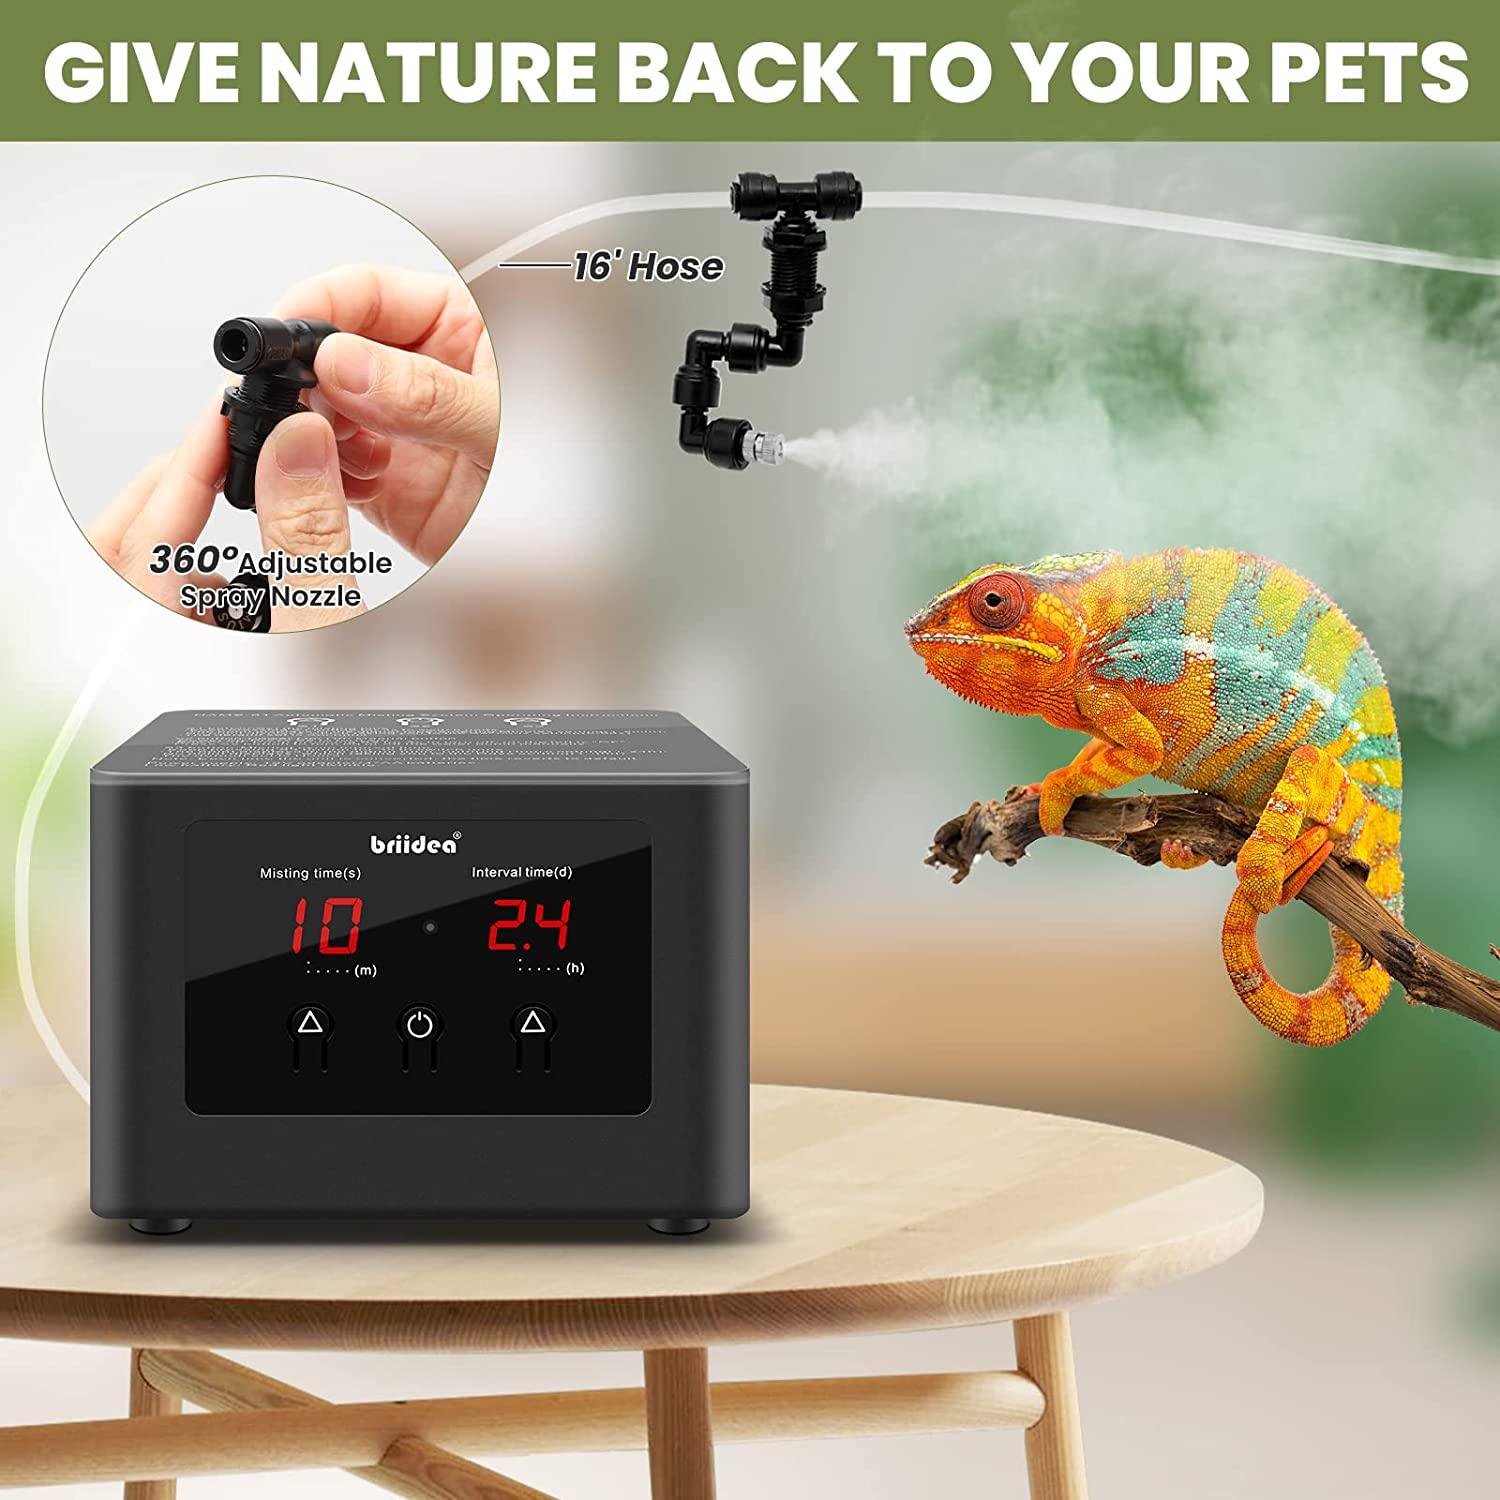 briidea Reptile Misting System, Terrarium Mister with 2 Power Supply Ways, Automatic Humidifiers with Adjustable Spray Nozzles for Reptiles Plants Amphibians Herps - briidea